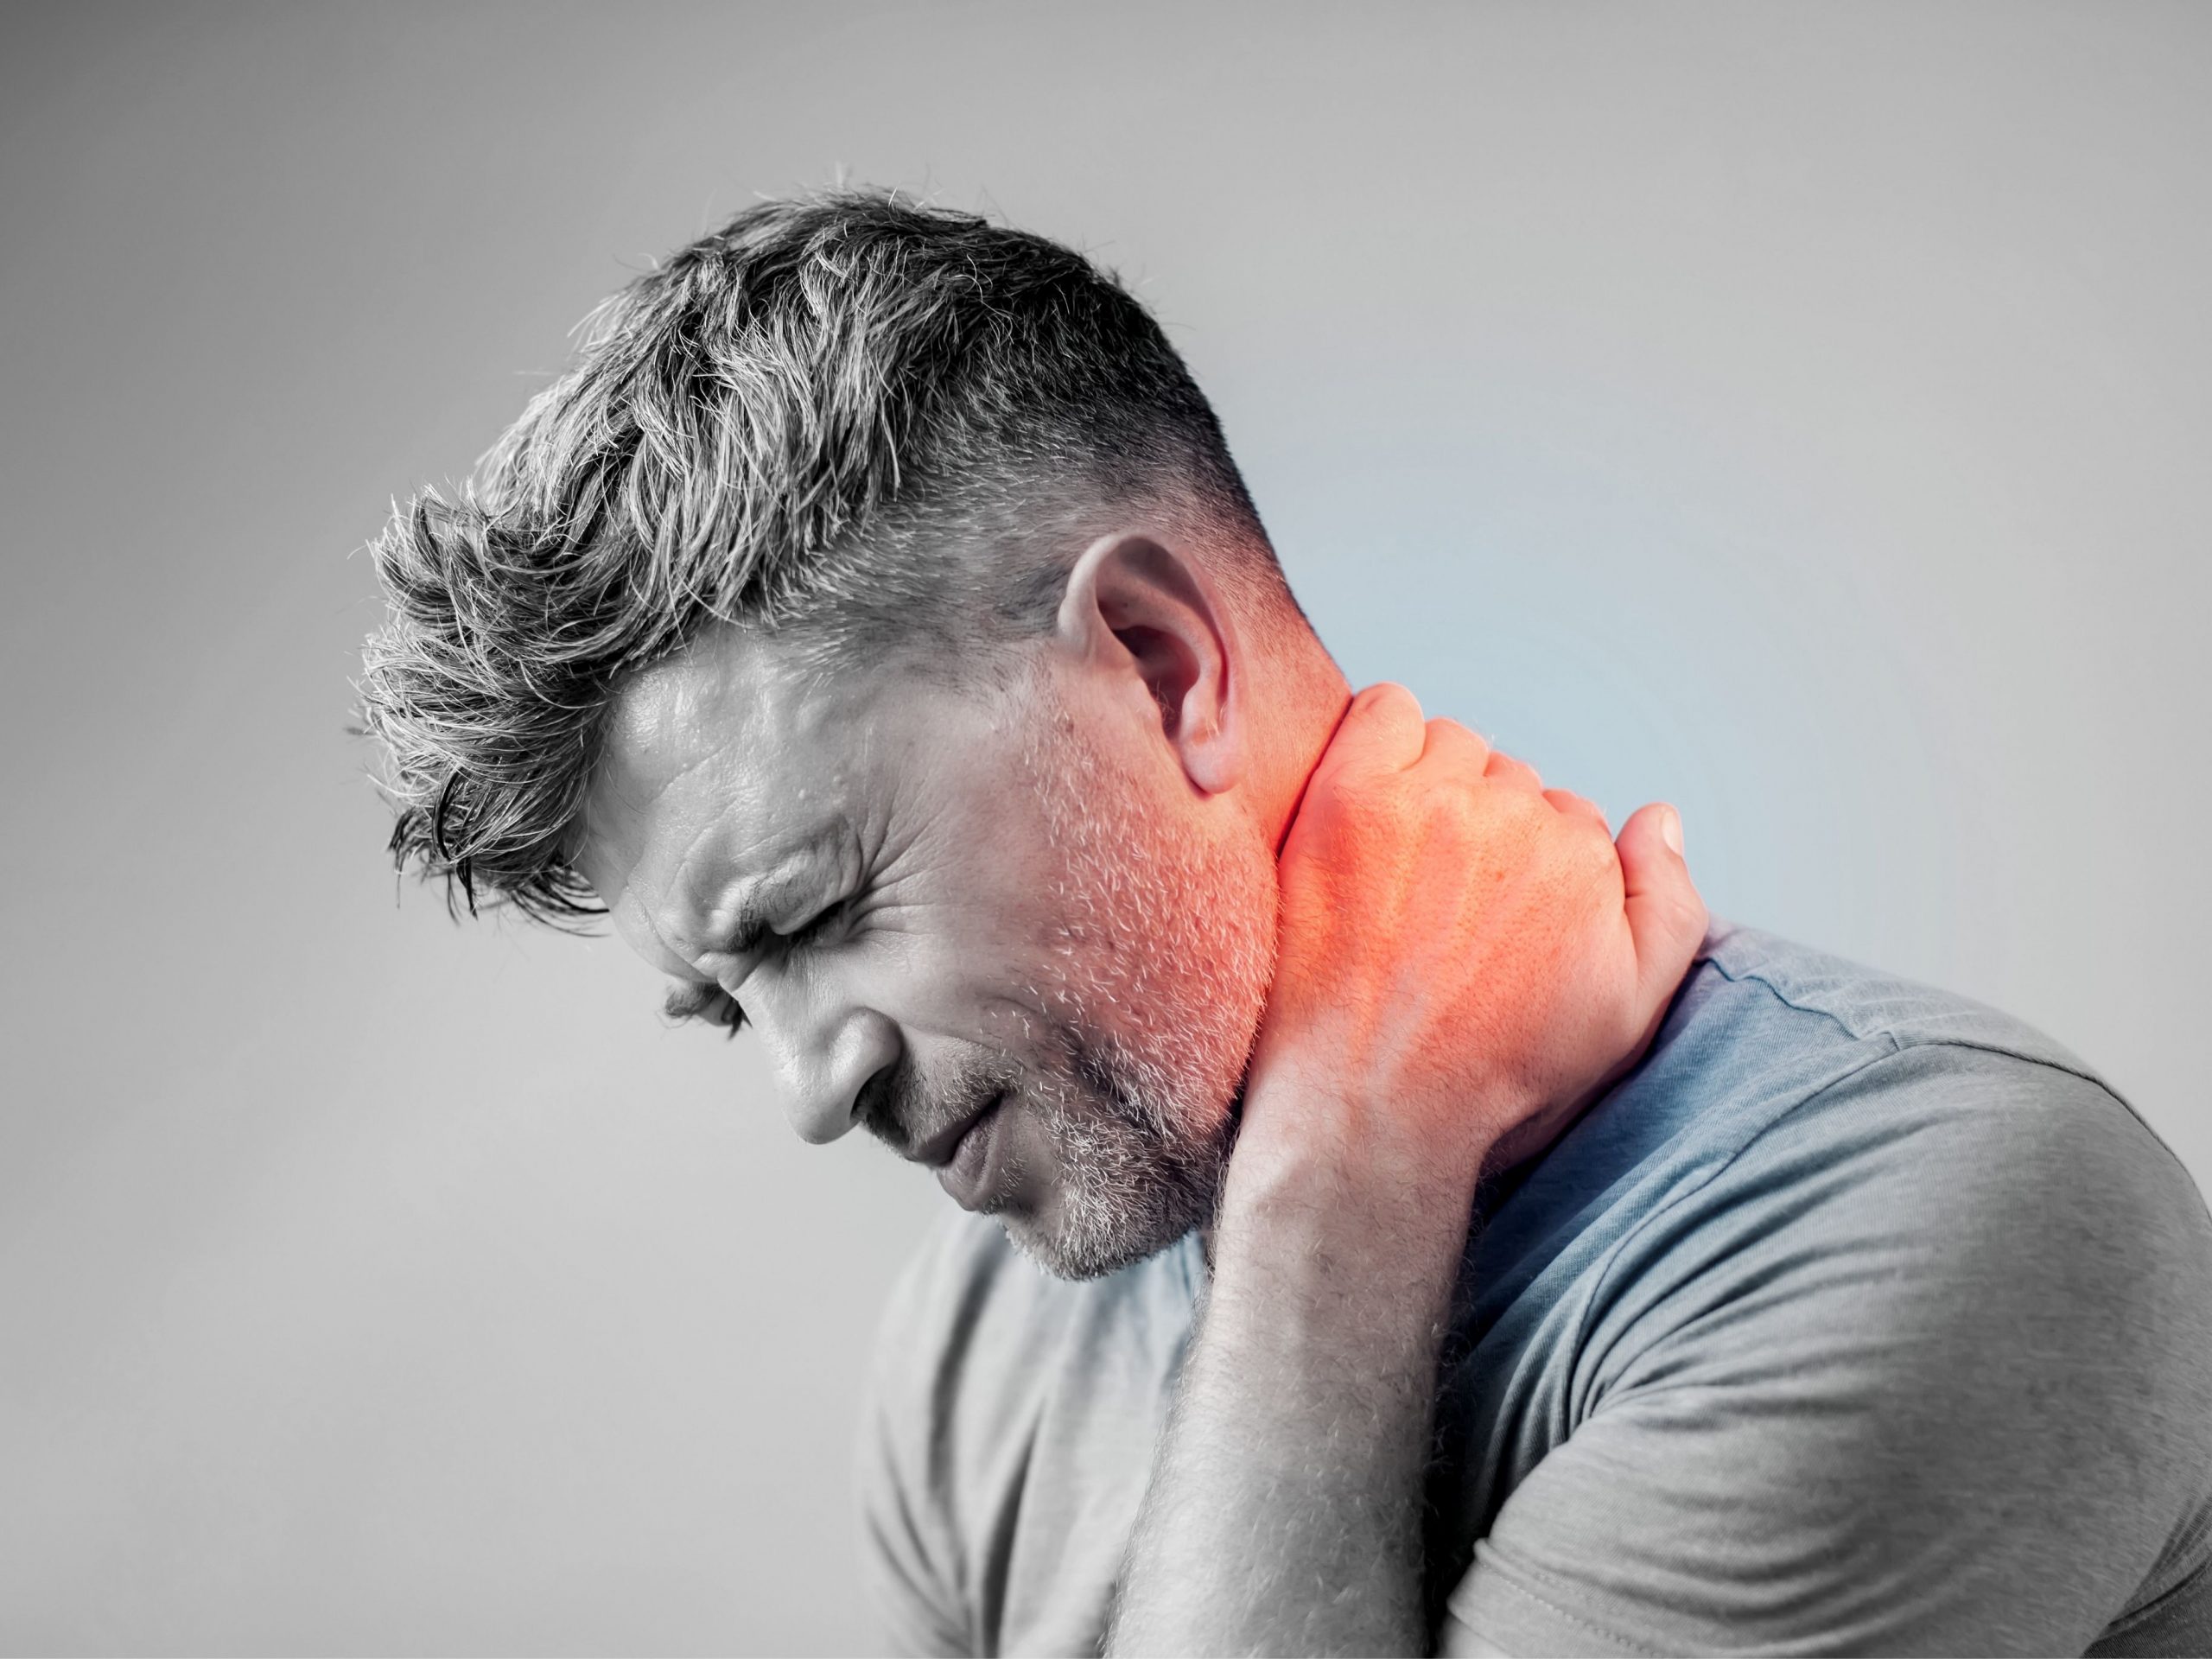 Neck Spasms and how to deal with them